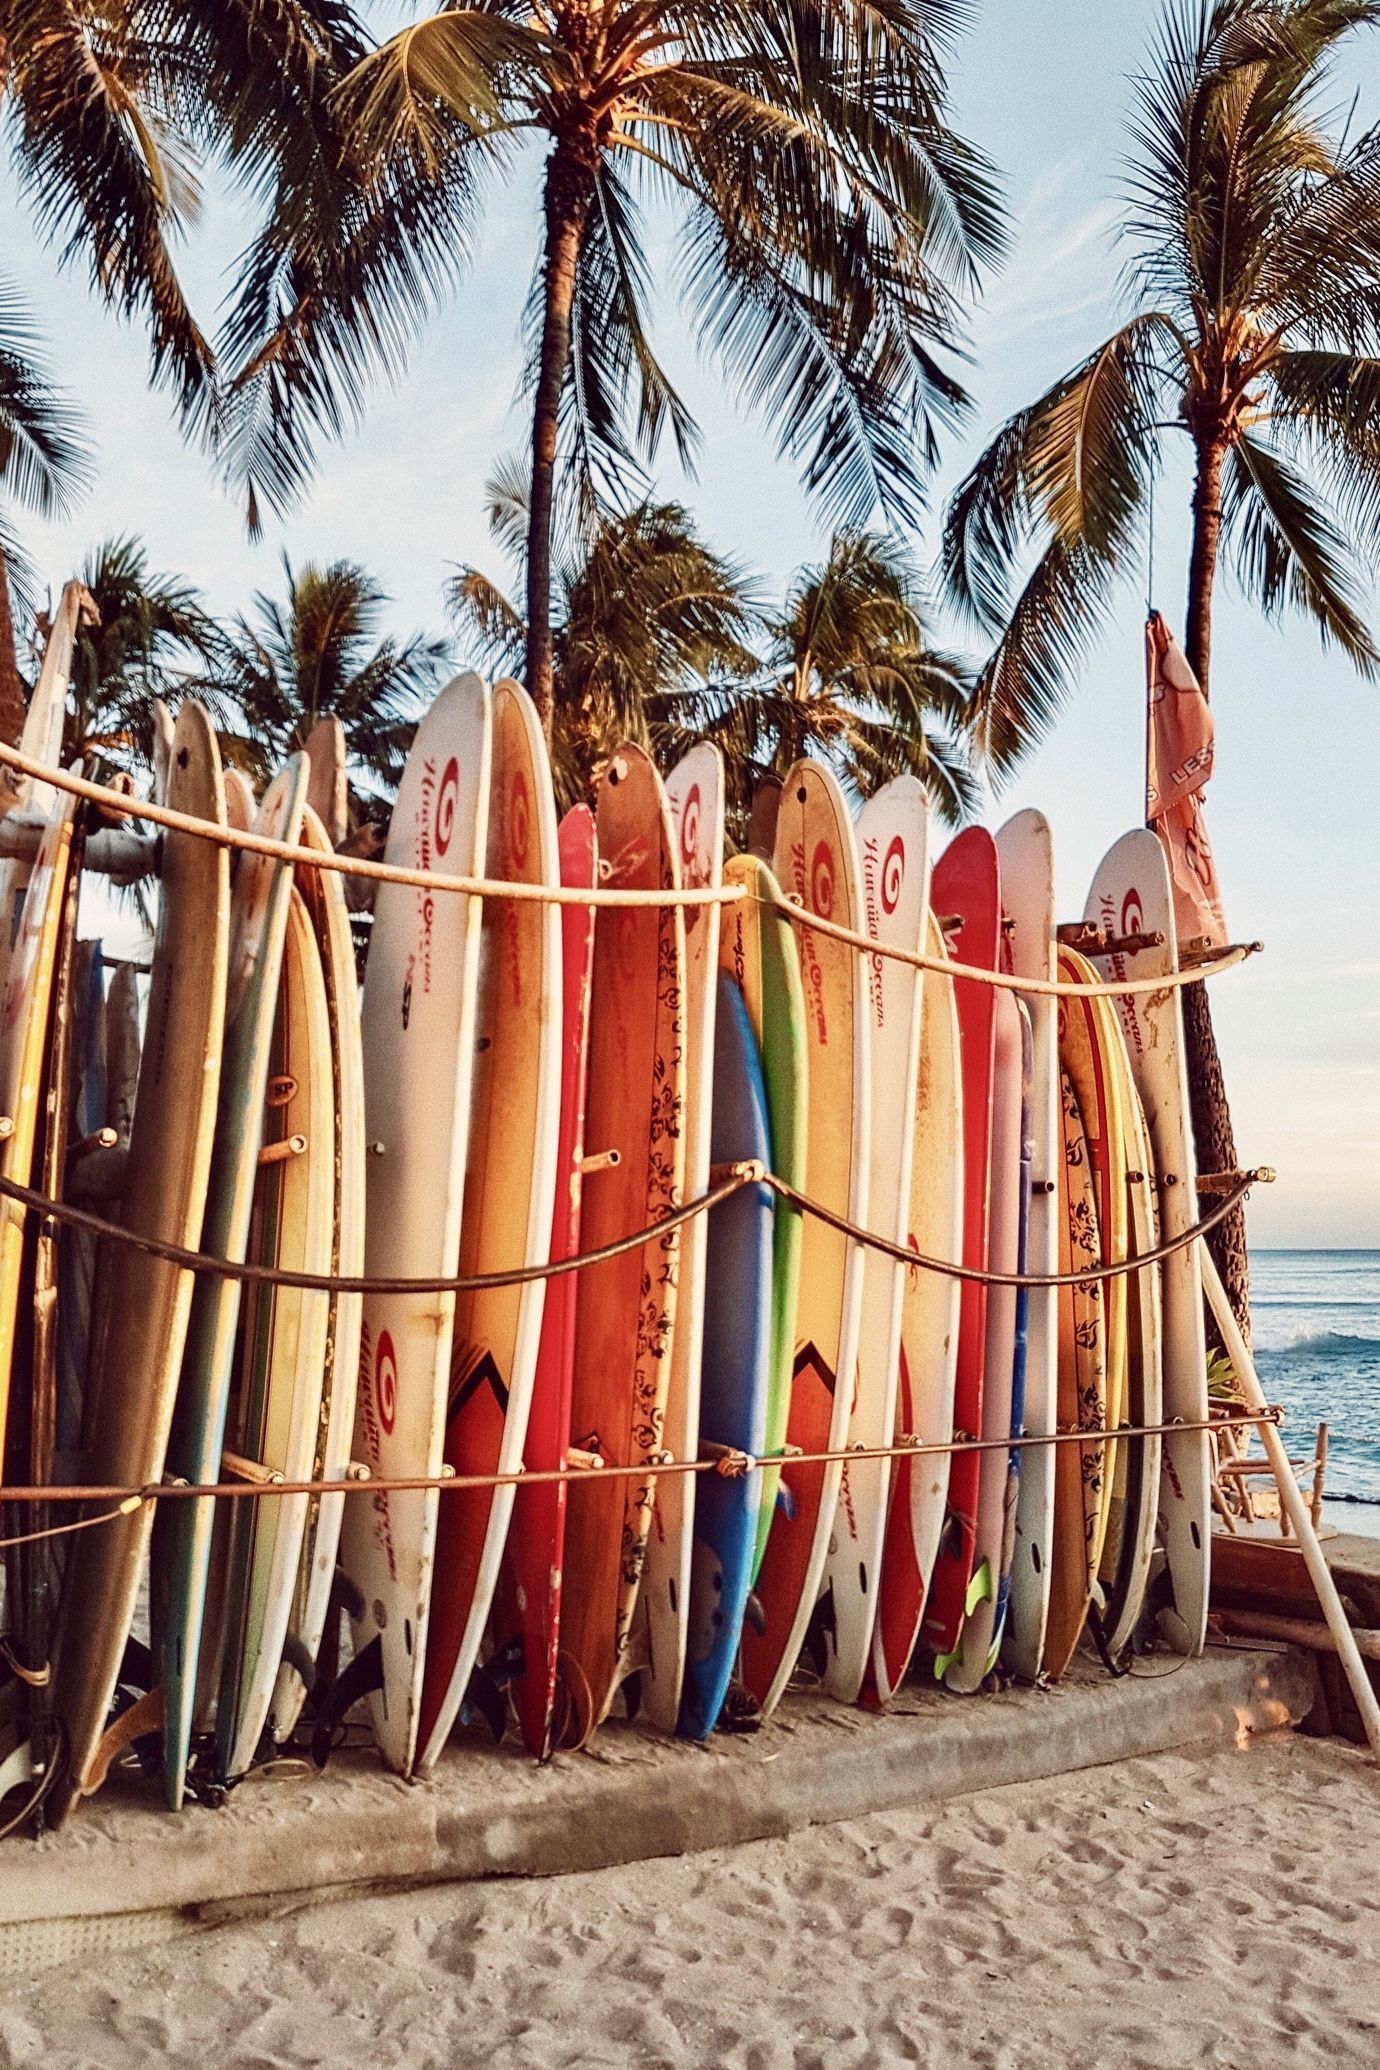 Surfboard Aesthetic Wallpapers Wallpaper Cave